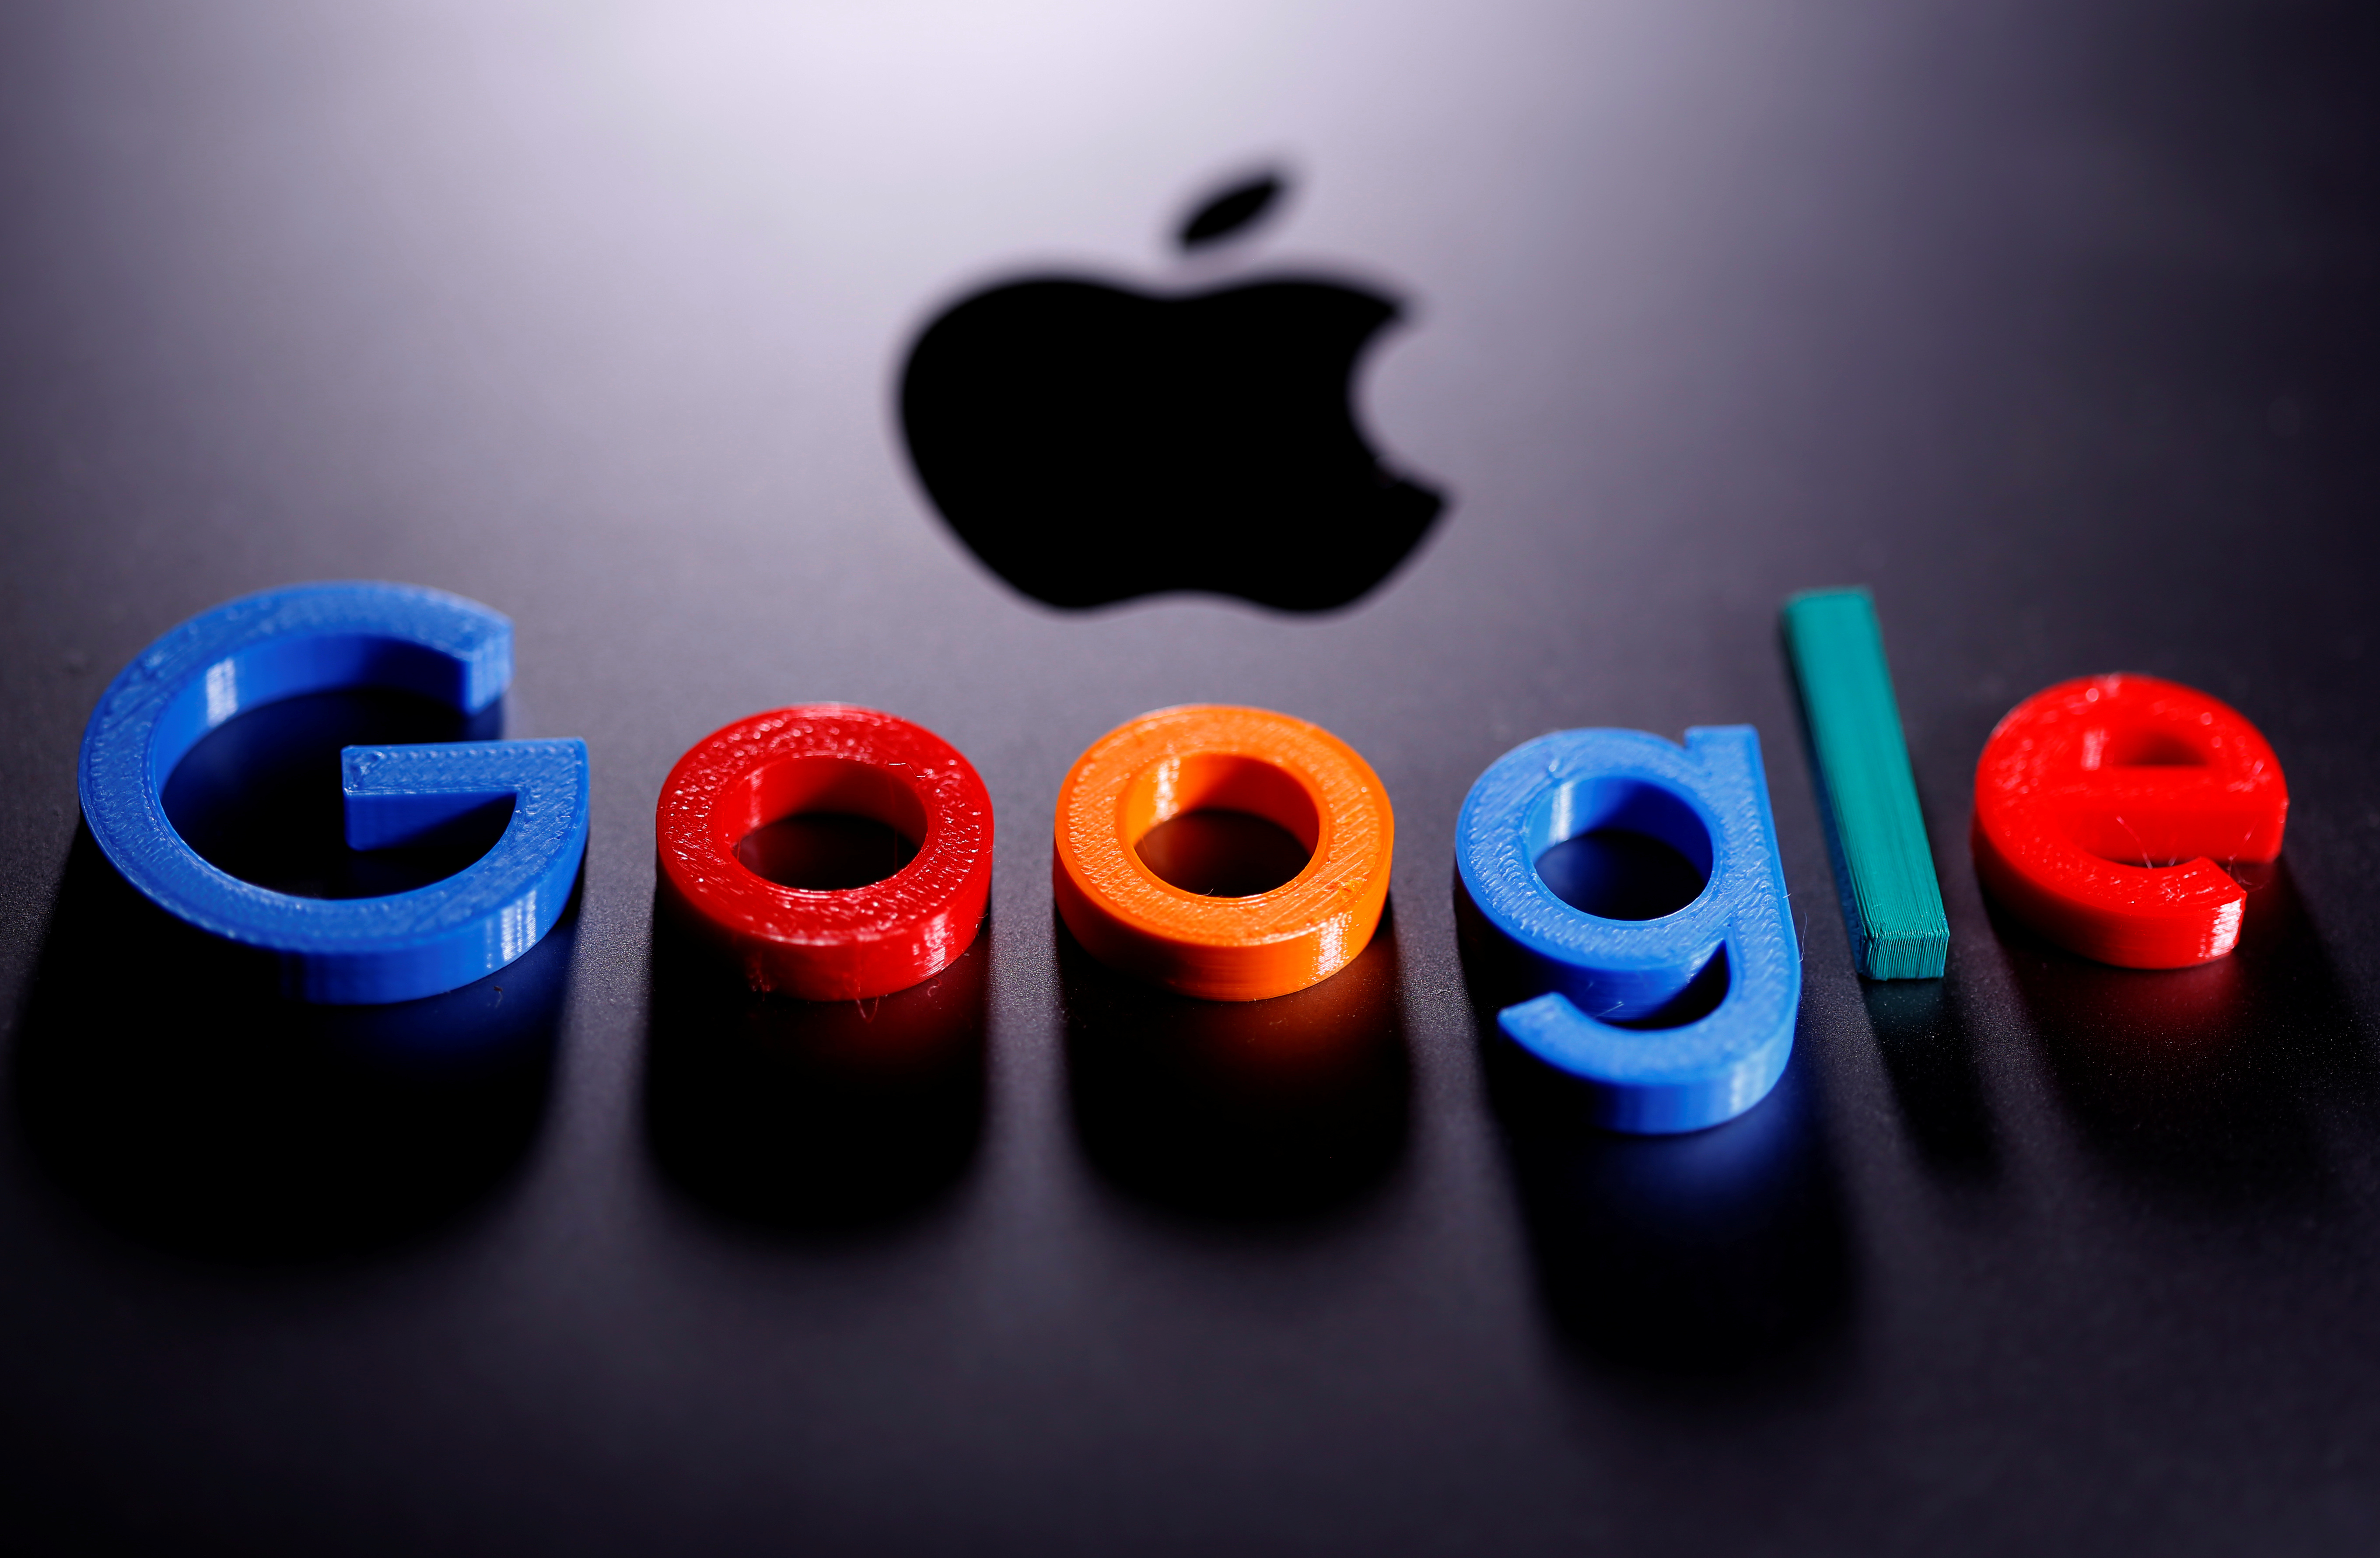 A 3D printed Google logo is placed on the Apple Macbook in this illustration